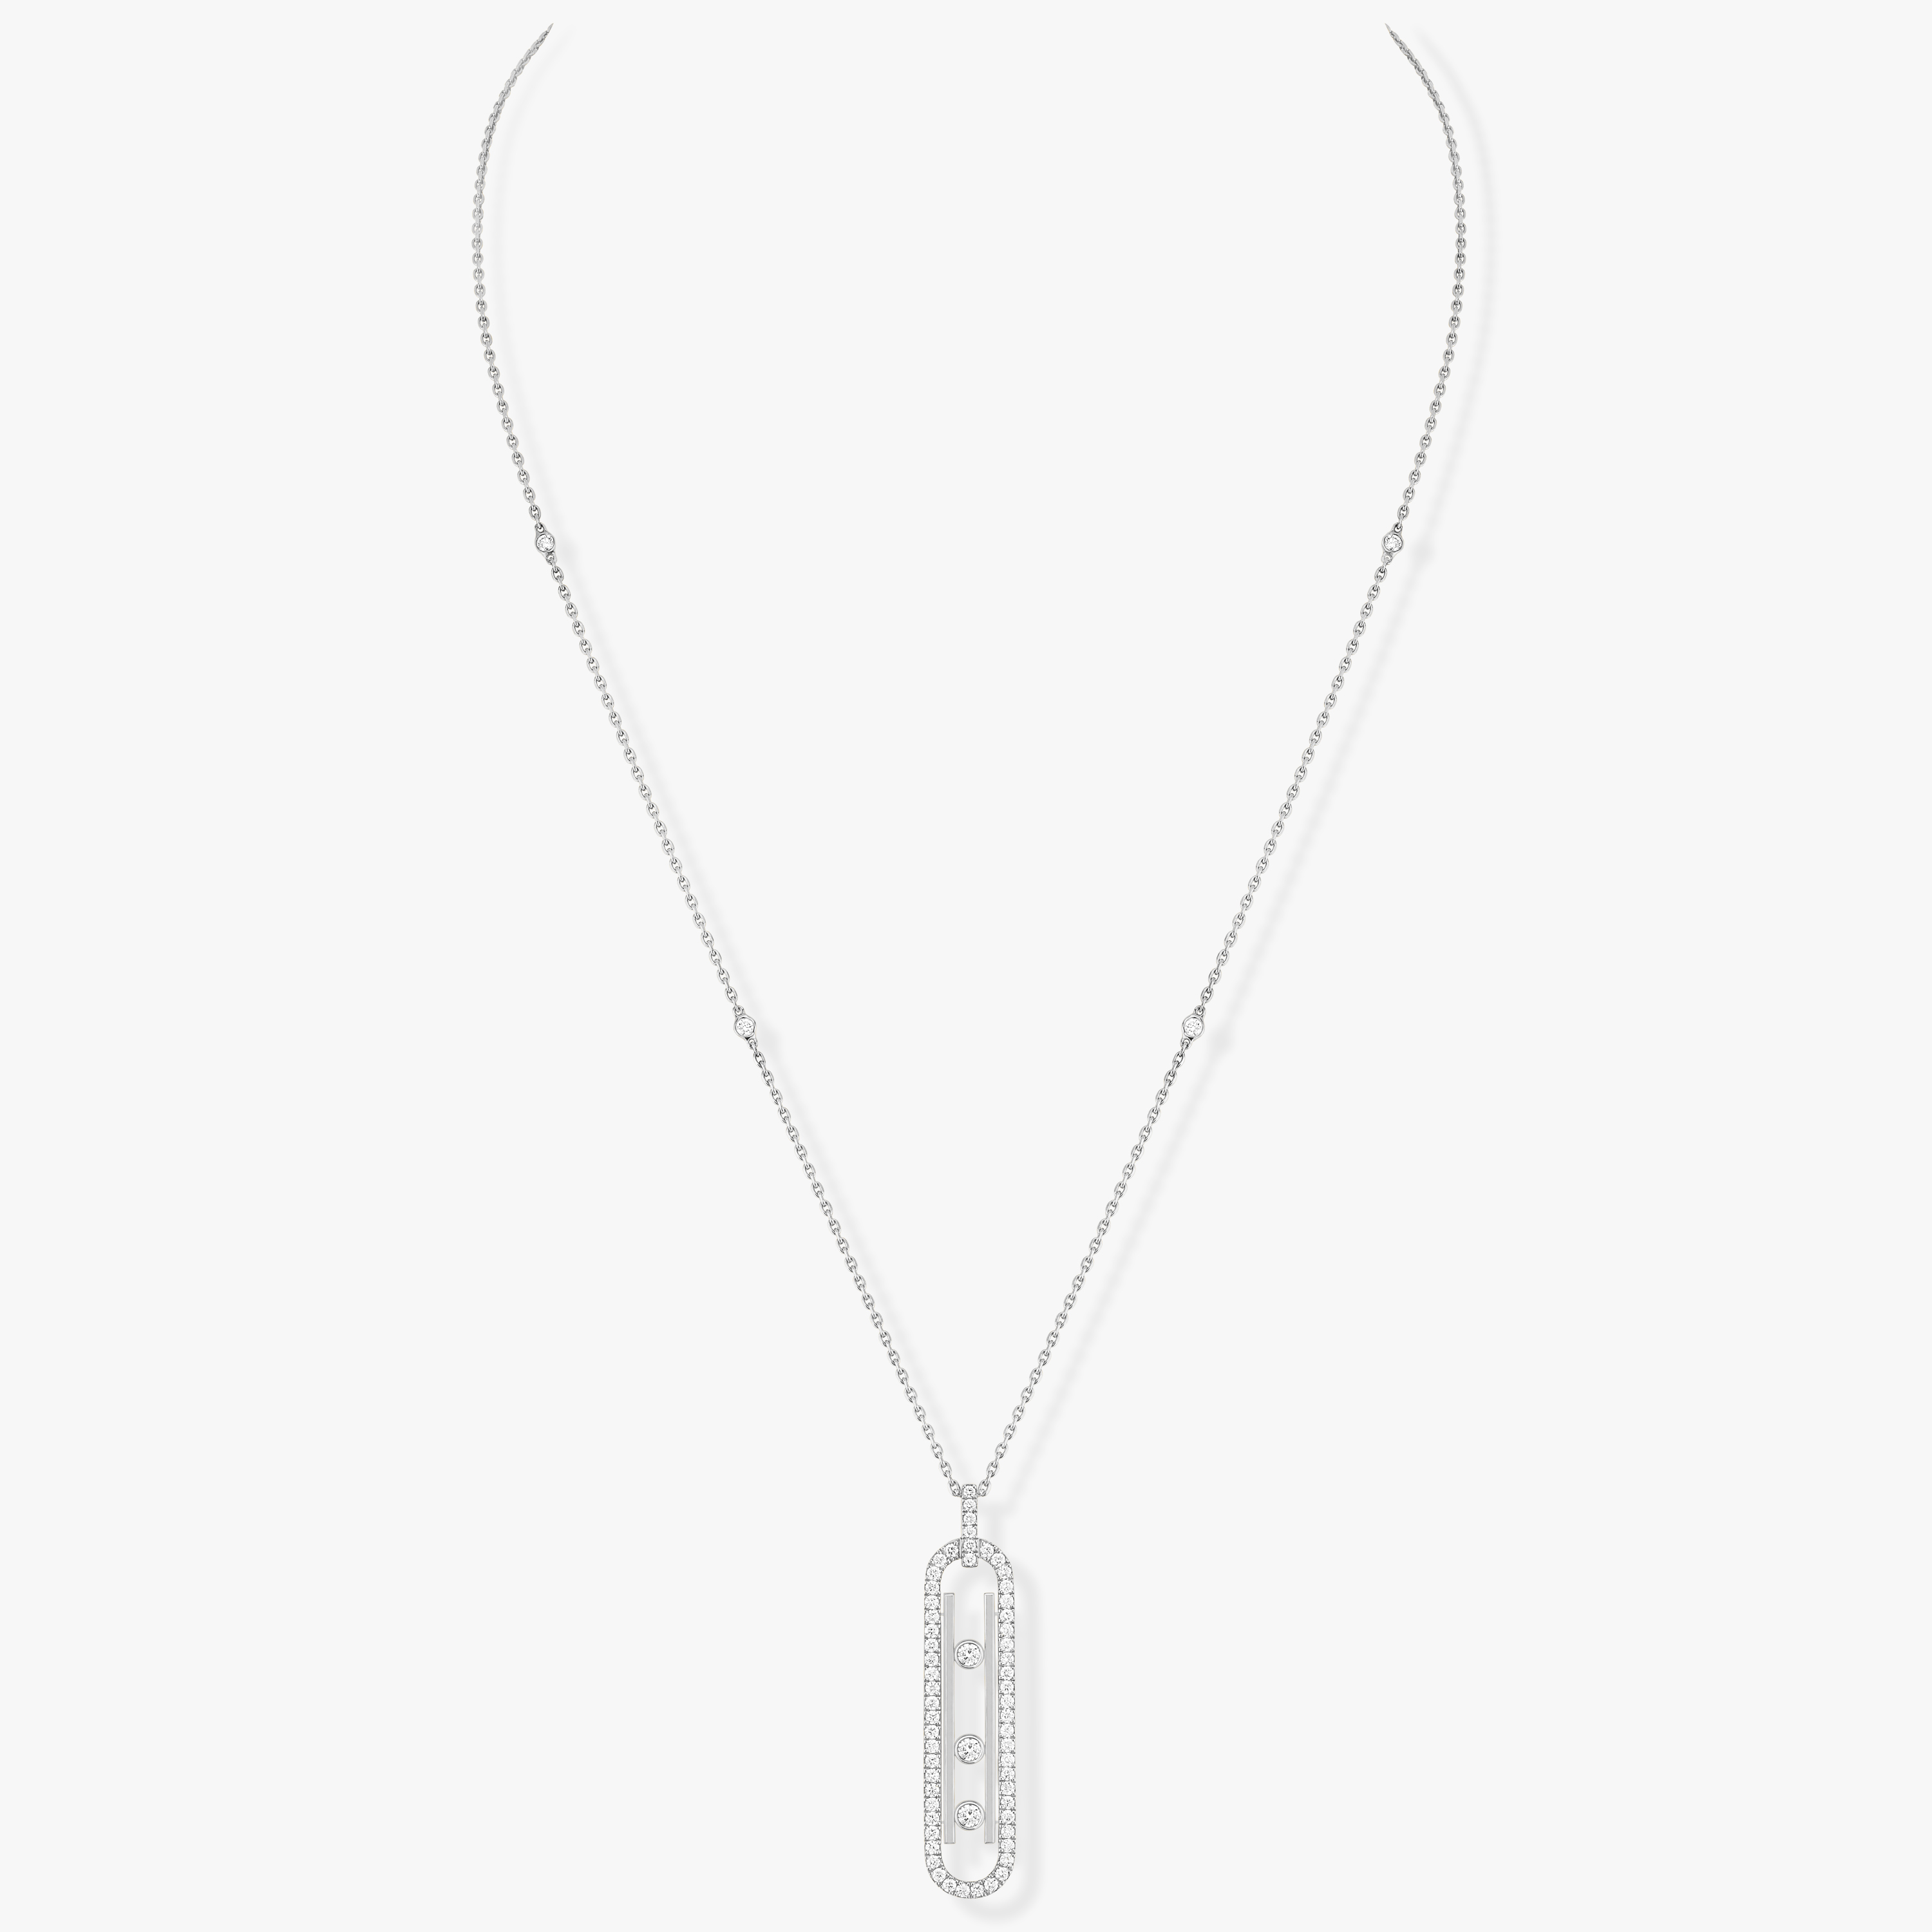 Collier Femme Or Blanc Diamant Collier Move 10th PM  10032-WG